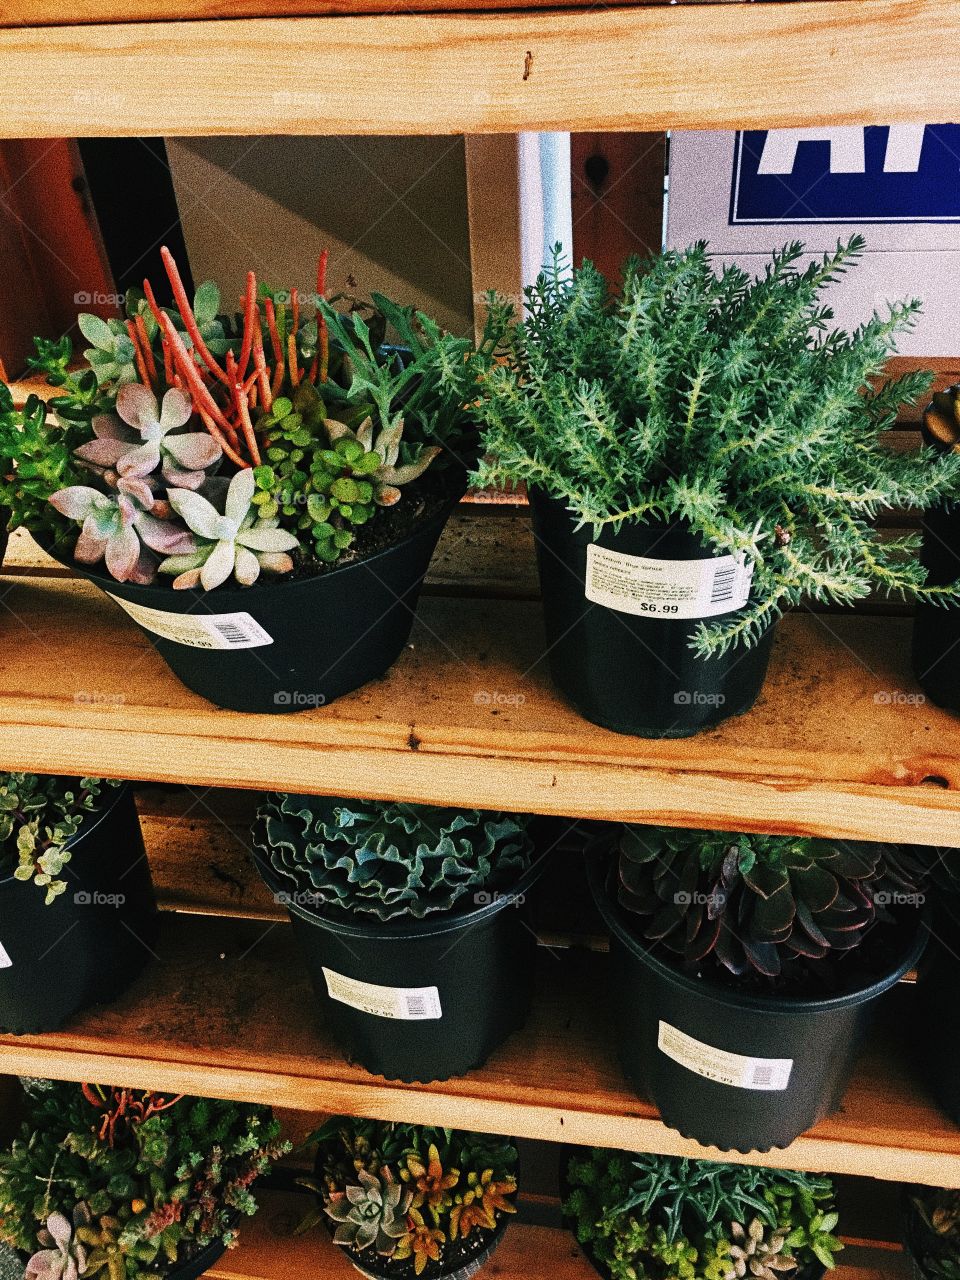 There’s a booth of succulents everytime I go shopping on the military base